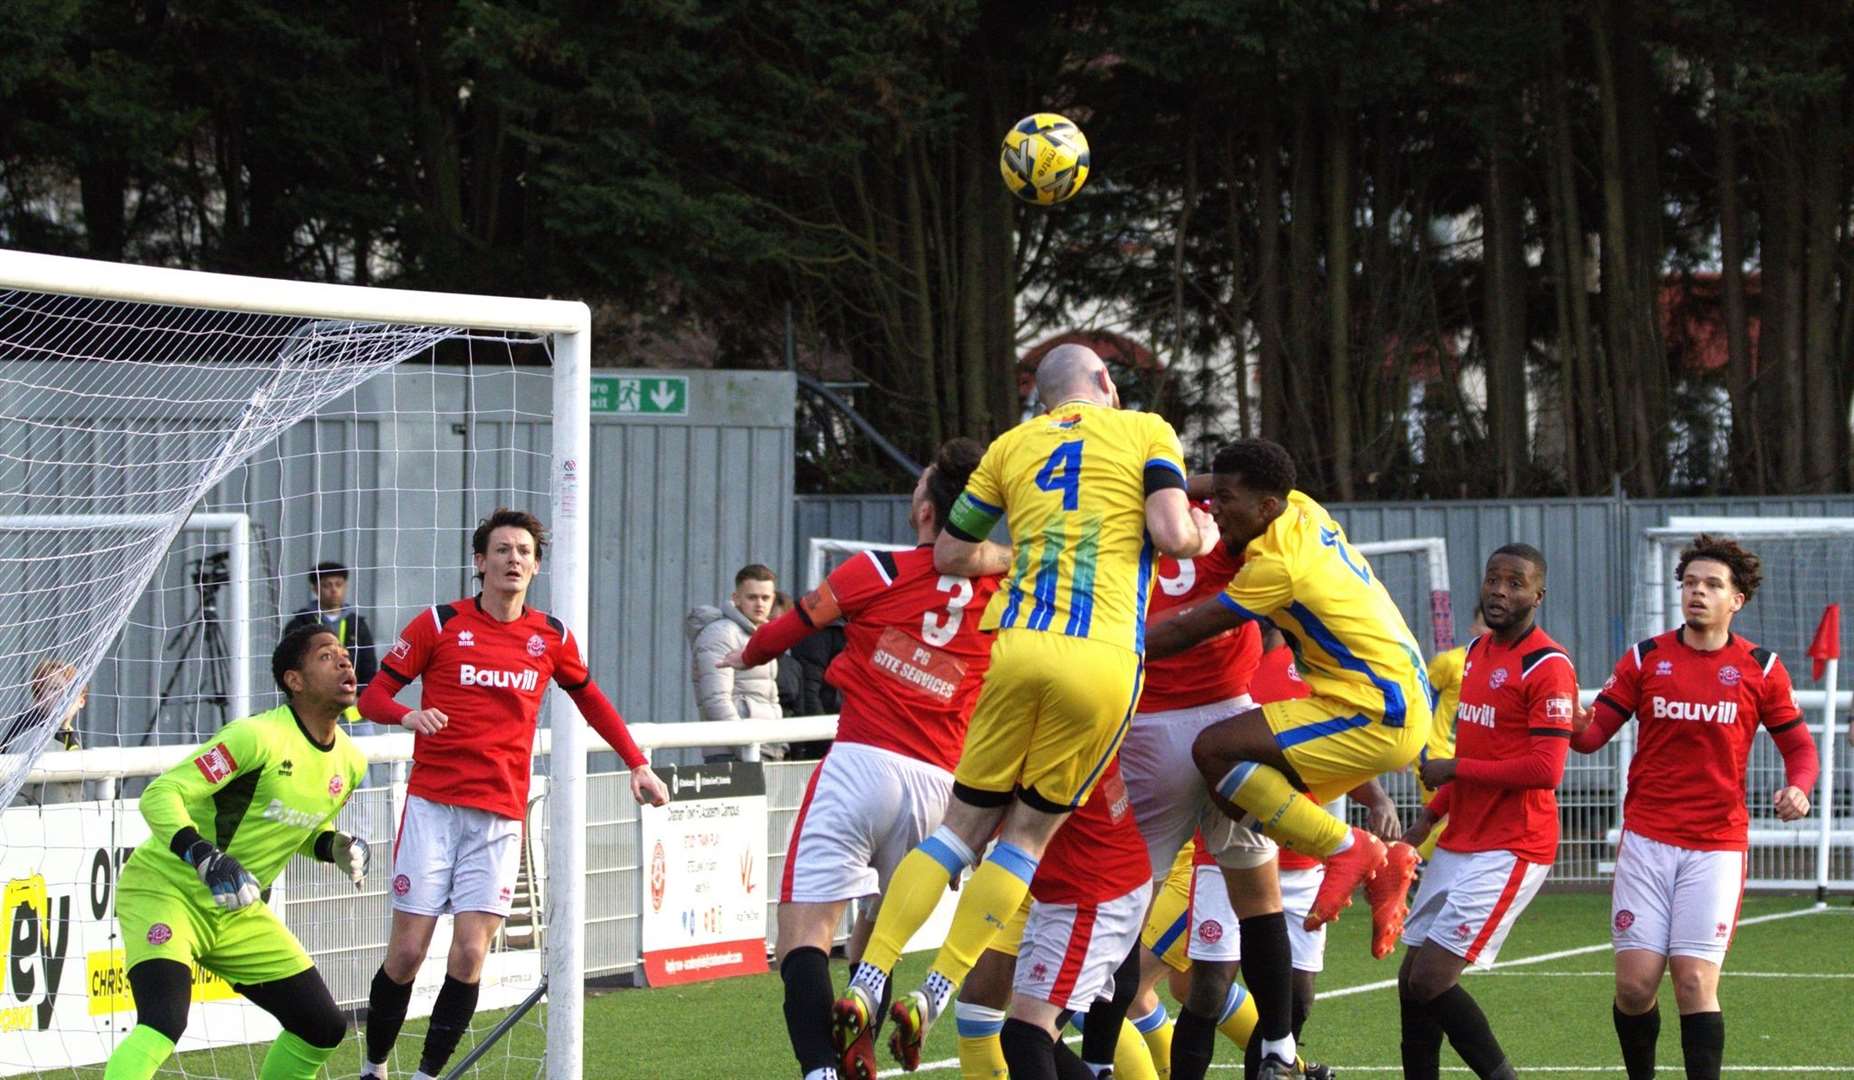 Chatham's game with Sittingbourne finished one apiece Picture: Allen Hollands